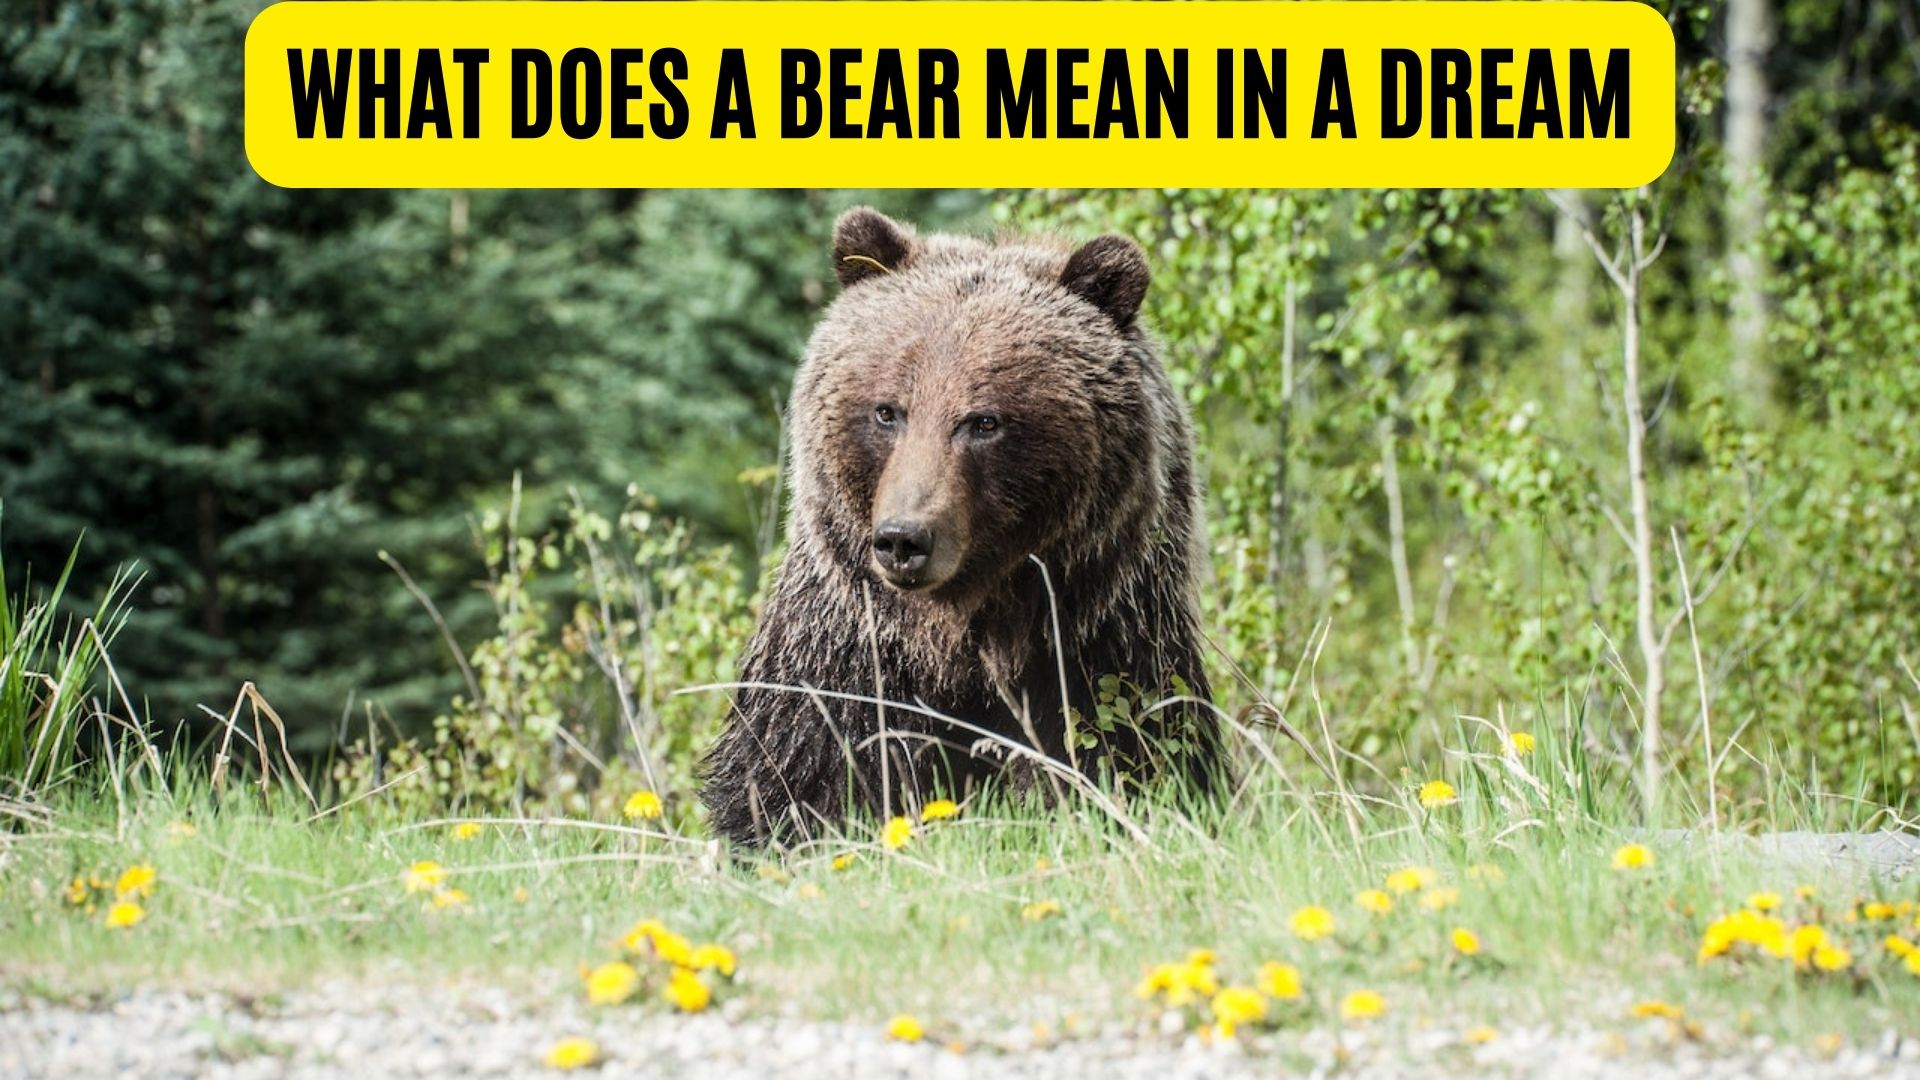 What Does A Bear Mean In A Dream? A Symbol Of Authority